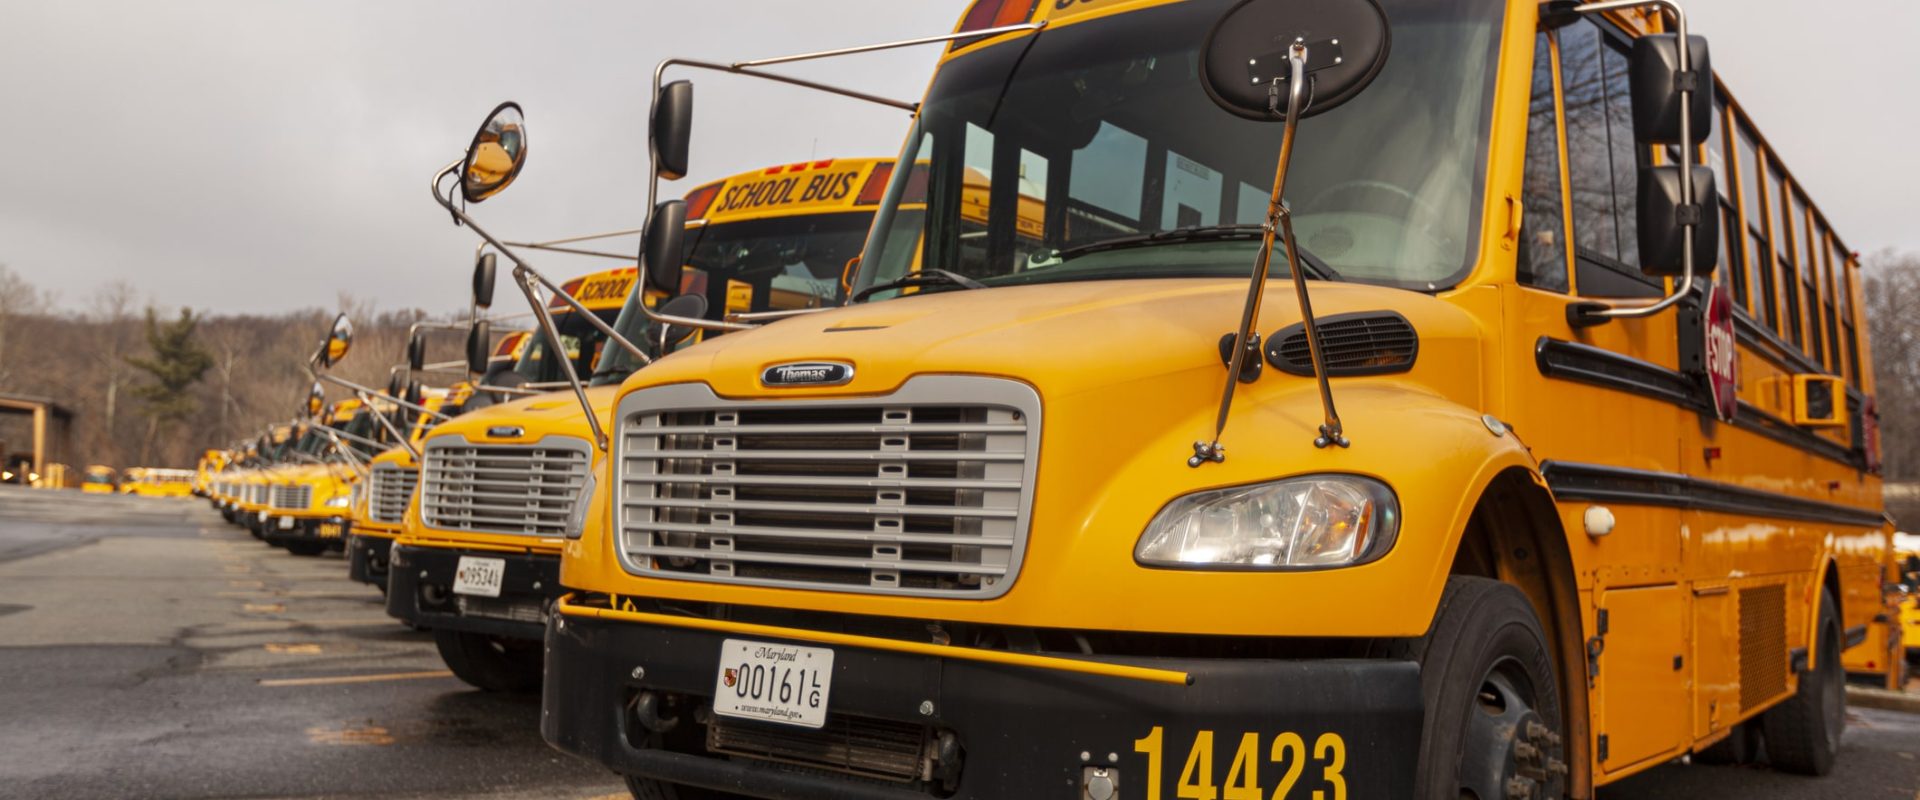 Maryland school buses parked in parking lot